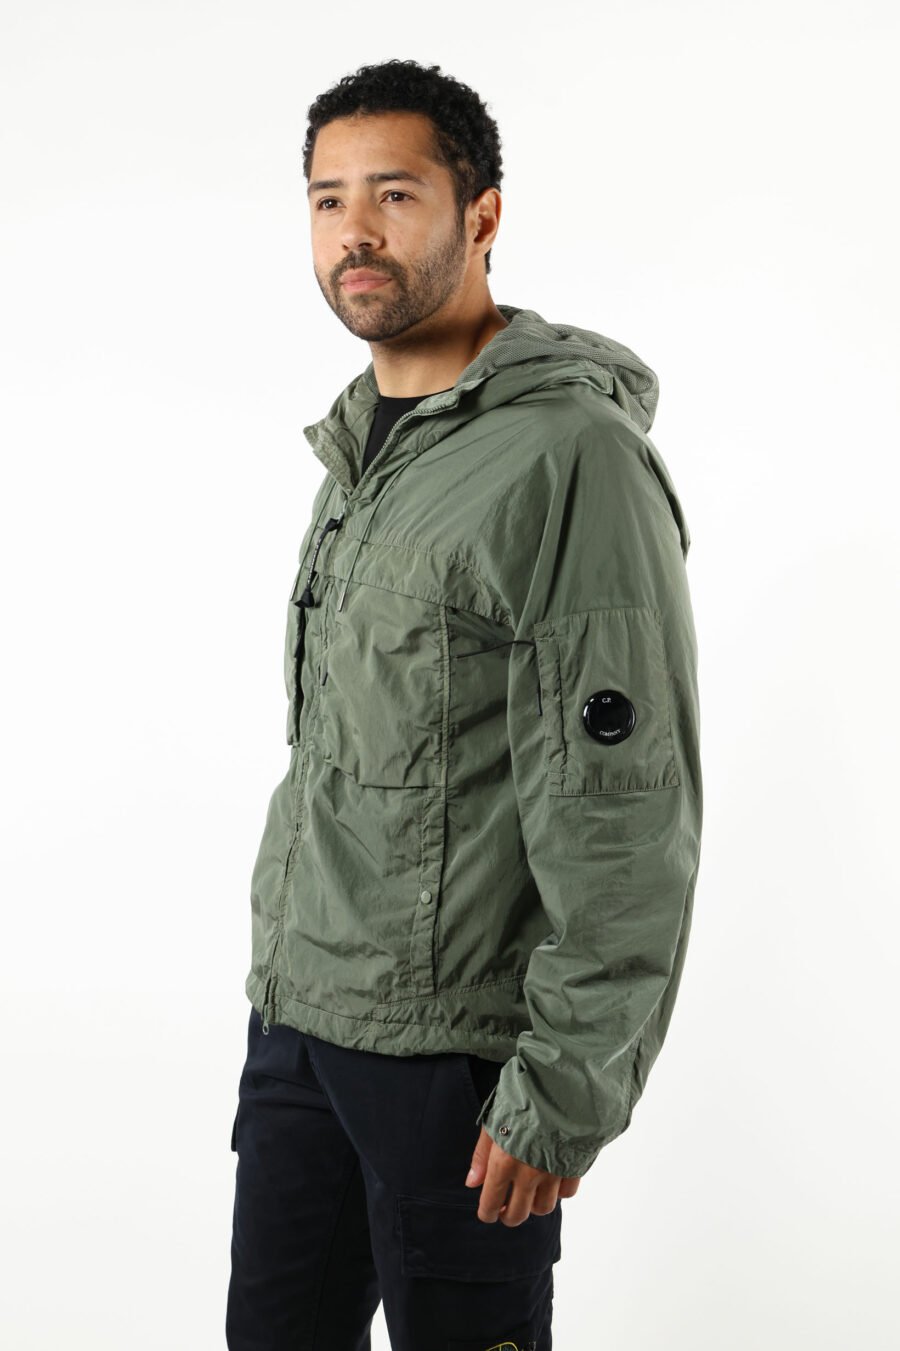 Grey-green jacket with hood and logo - 111408